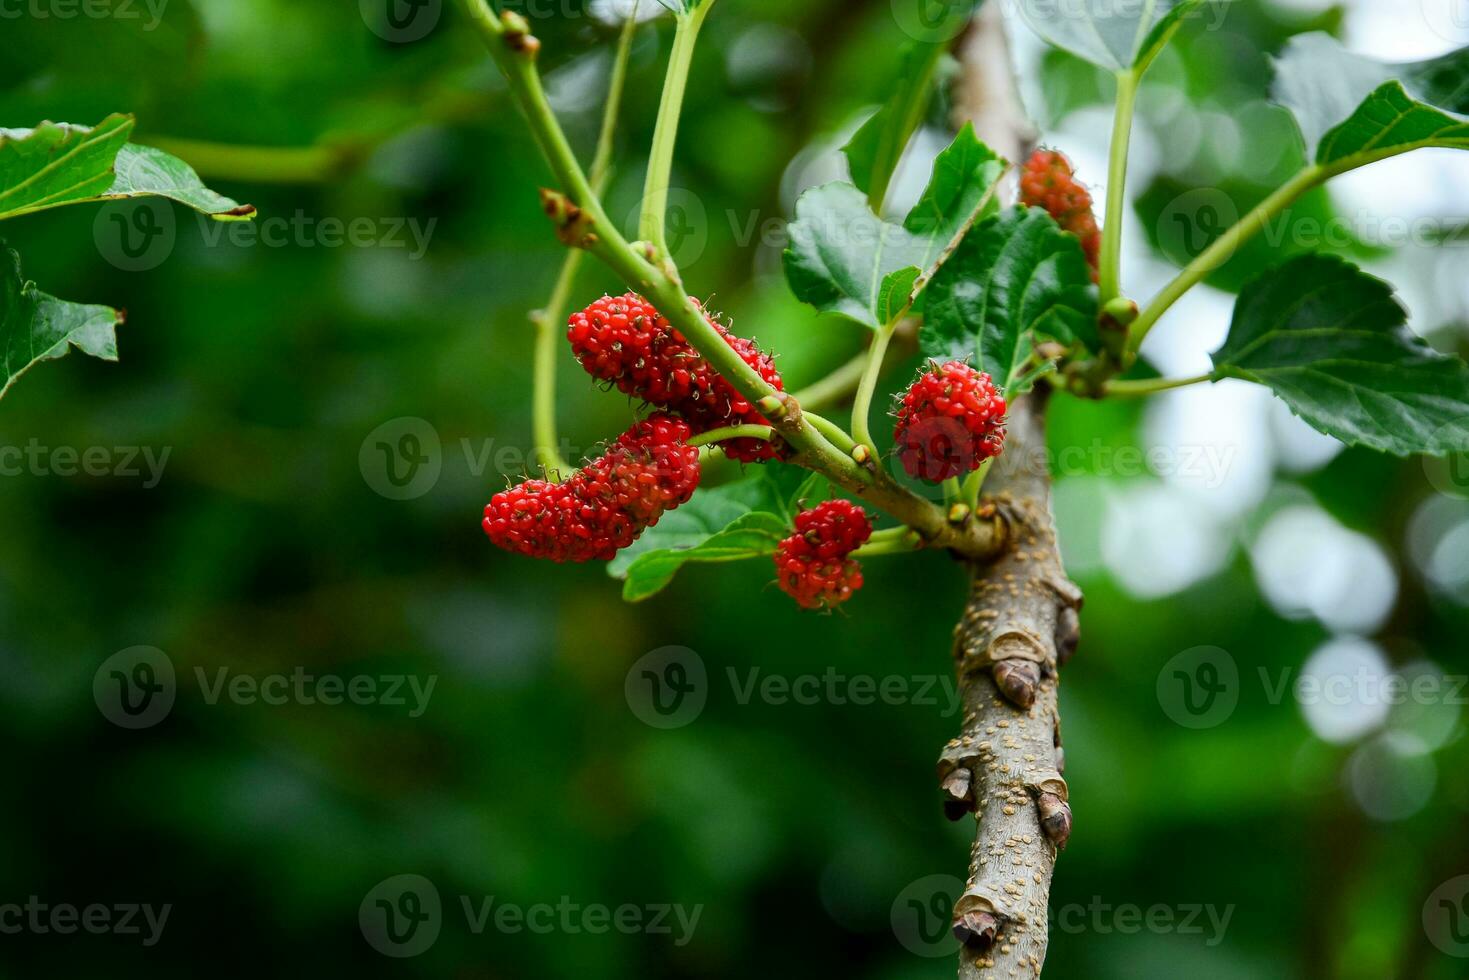 red mulberry fruit in thiere brunch photo